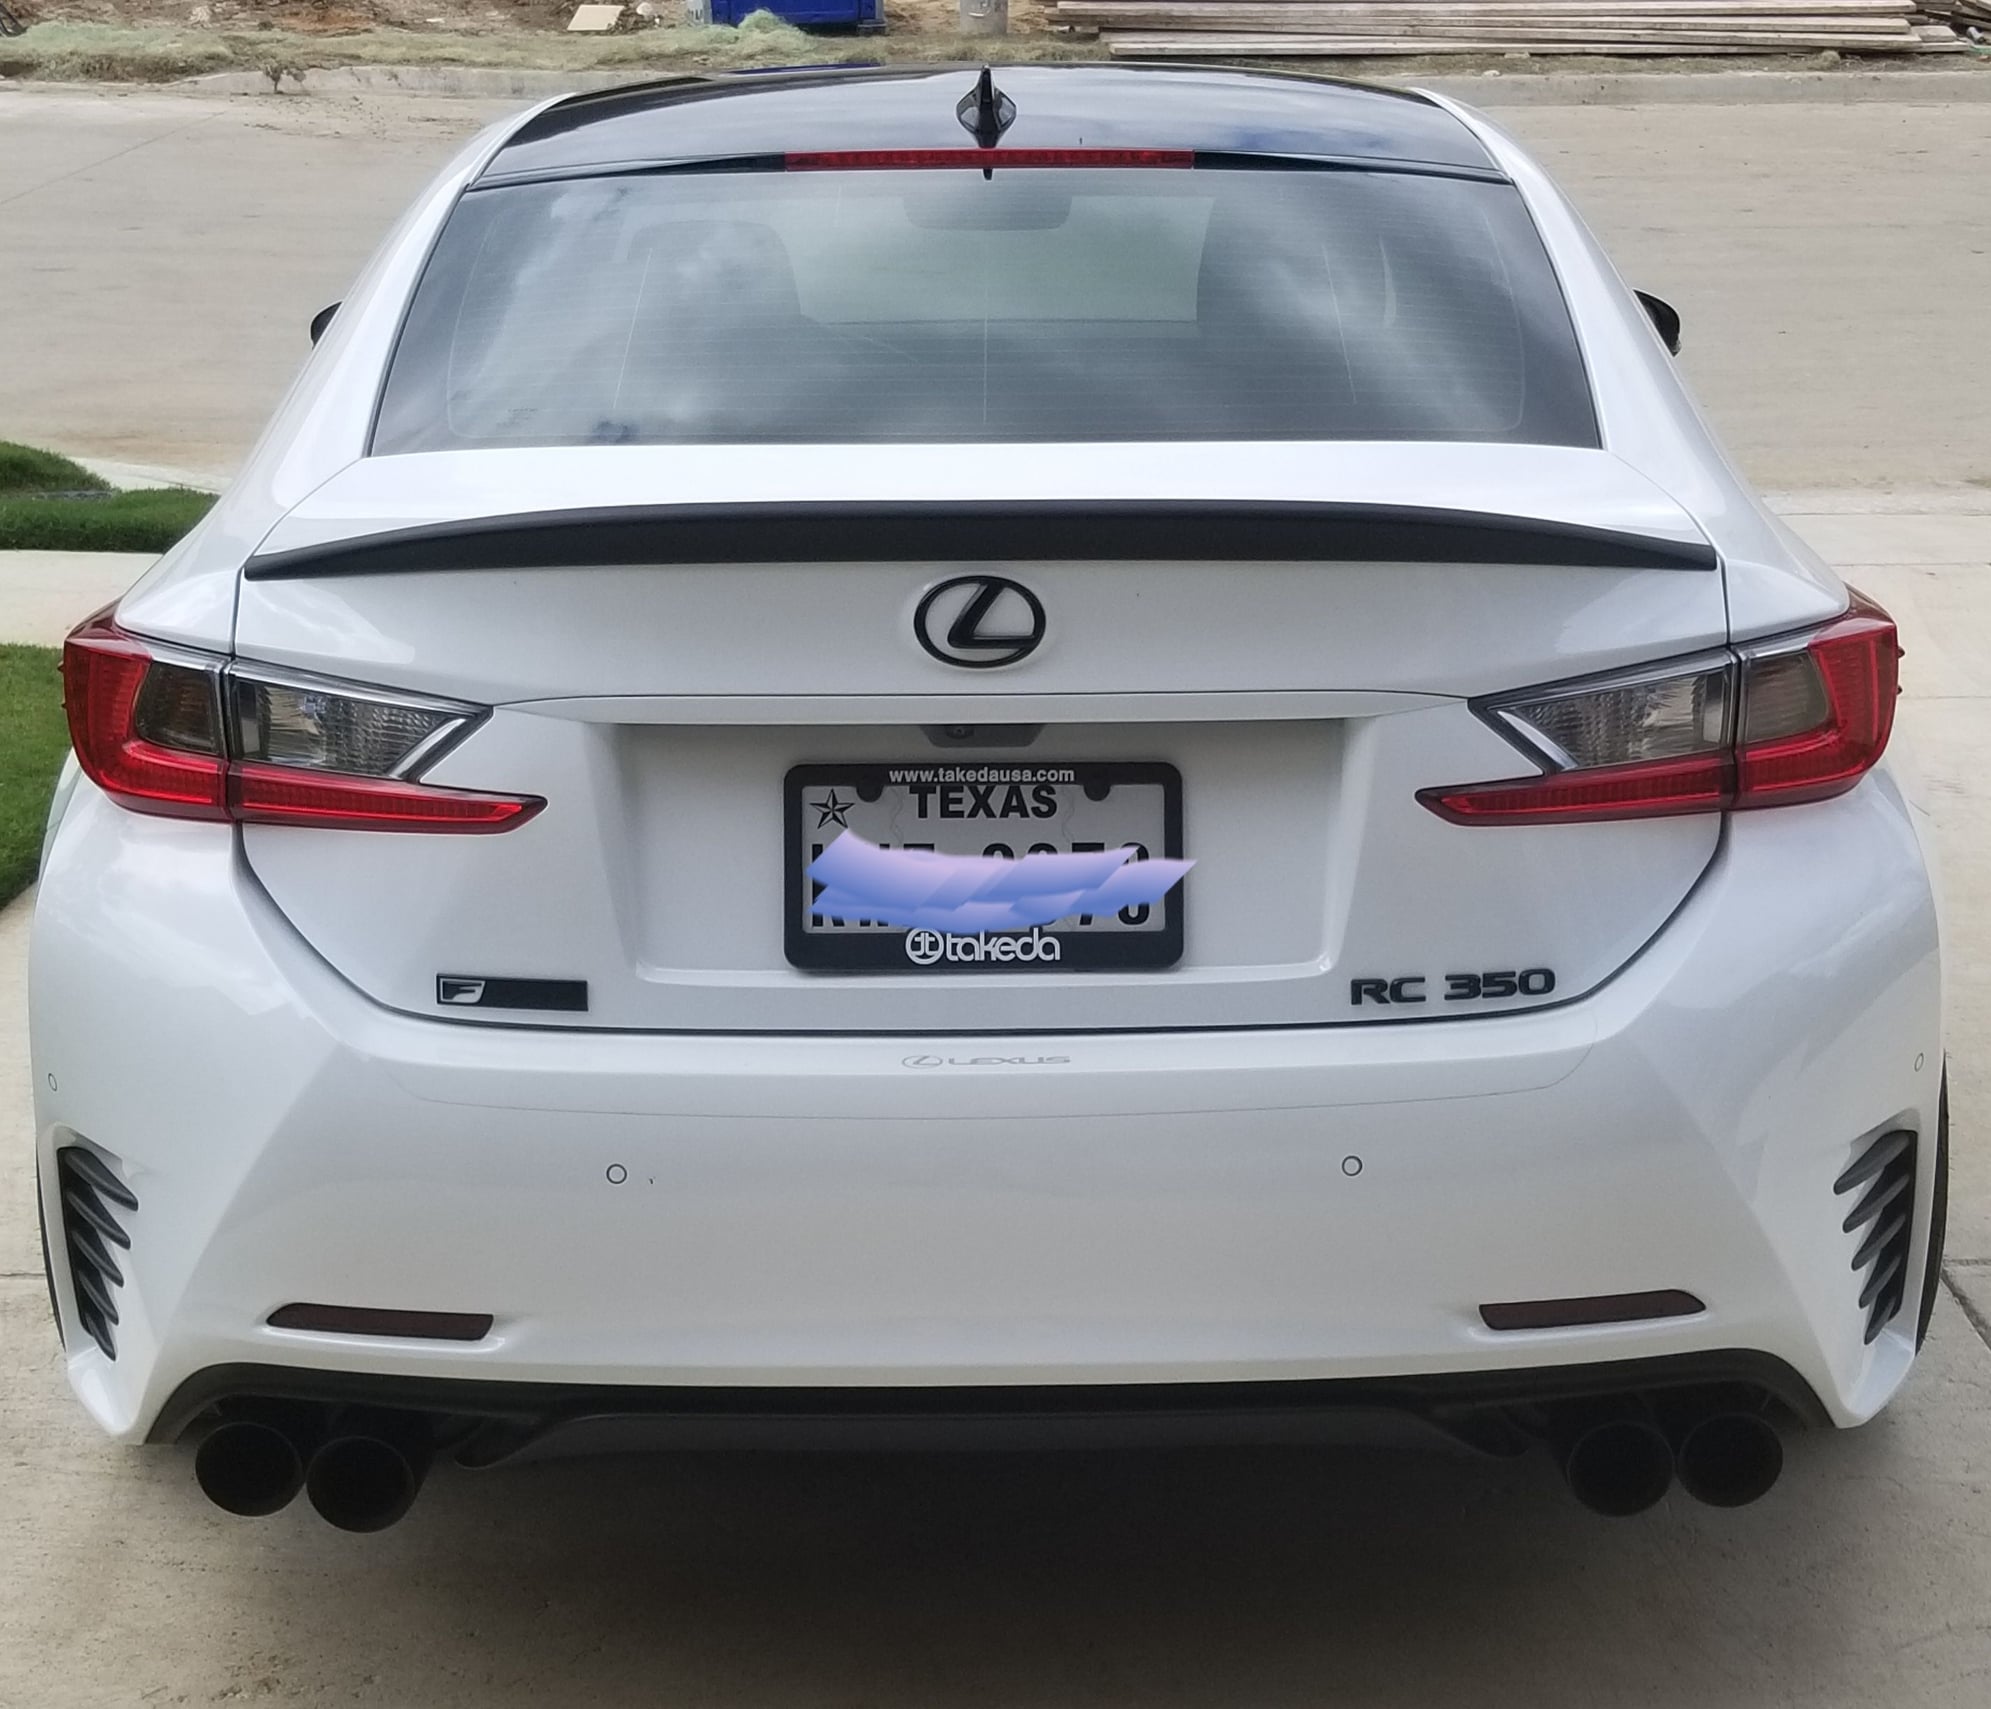 2016 Lexus RC350 - 2016 RC 350 F-Sport - Used - VIN JTHHE5BC7G5013817 - 6 cyl - 2WD - Automatic - Coupe - White - Argyle, TX 76226, United States